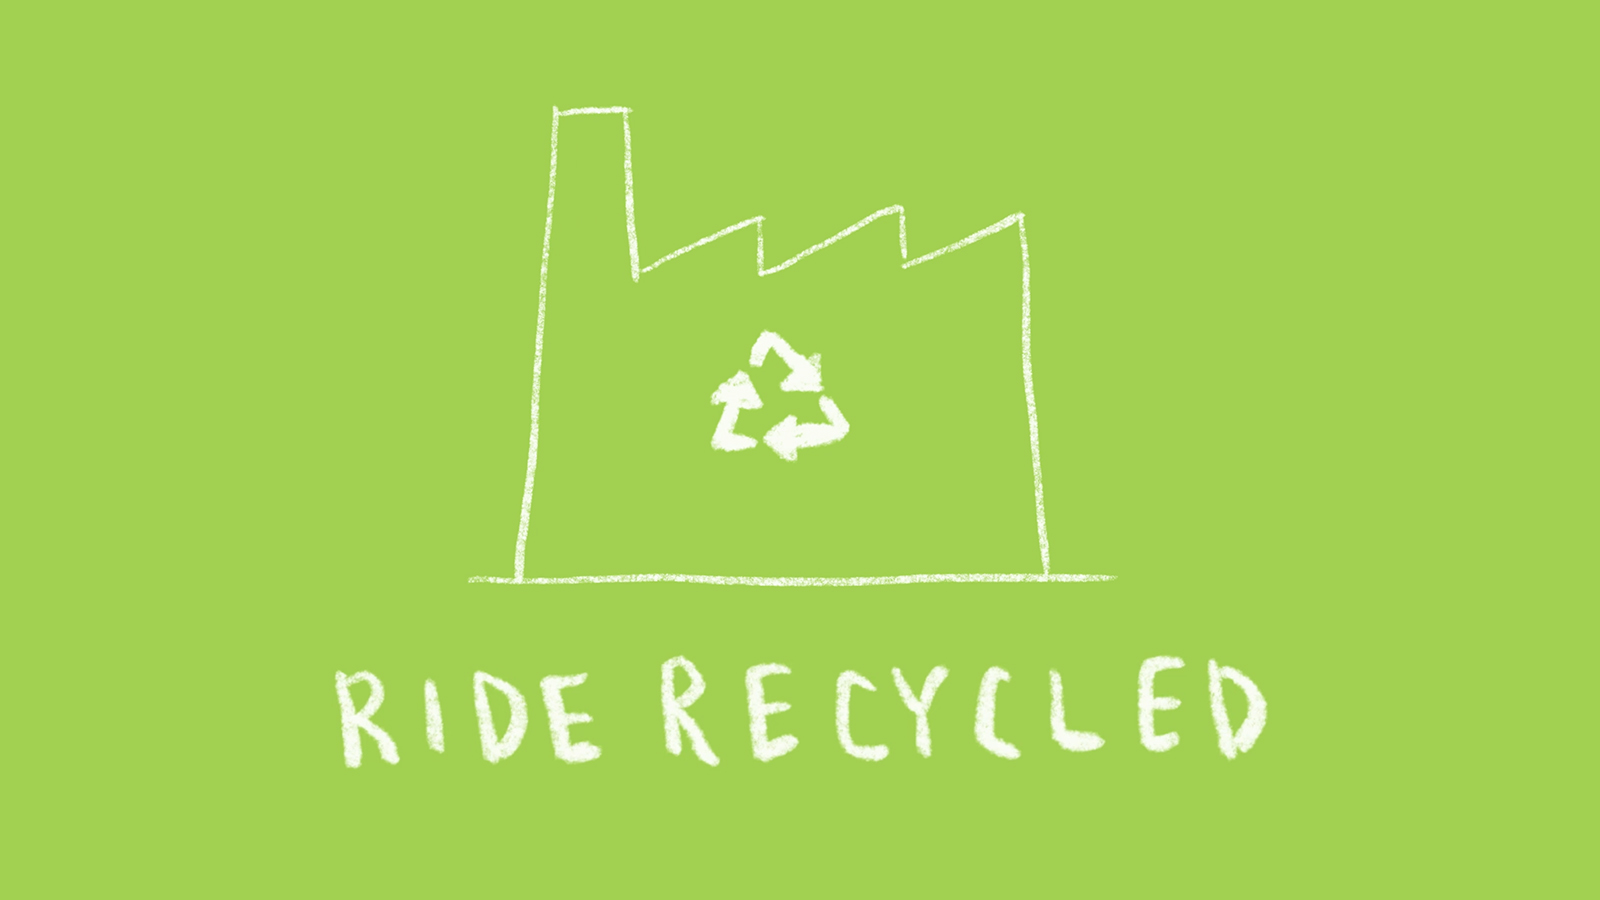 RIDE RECYCLED